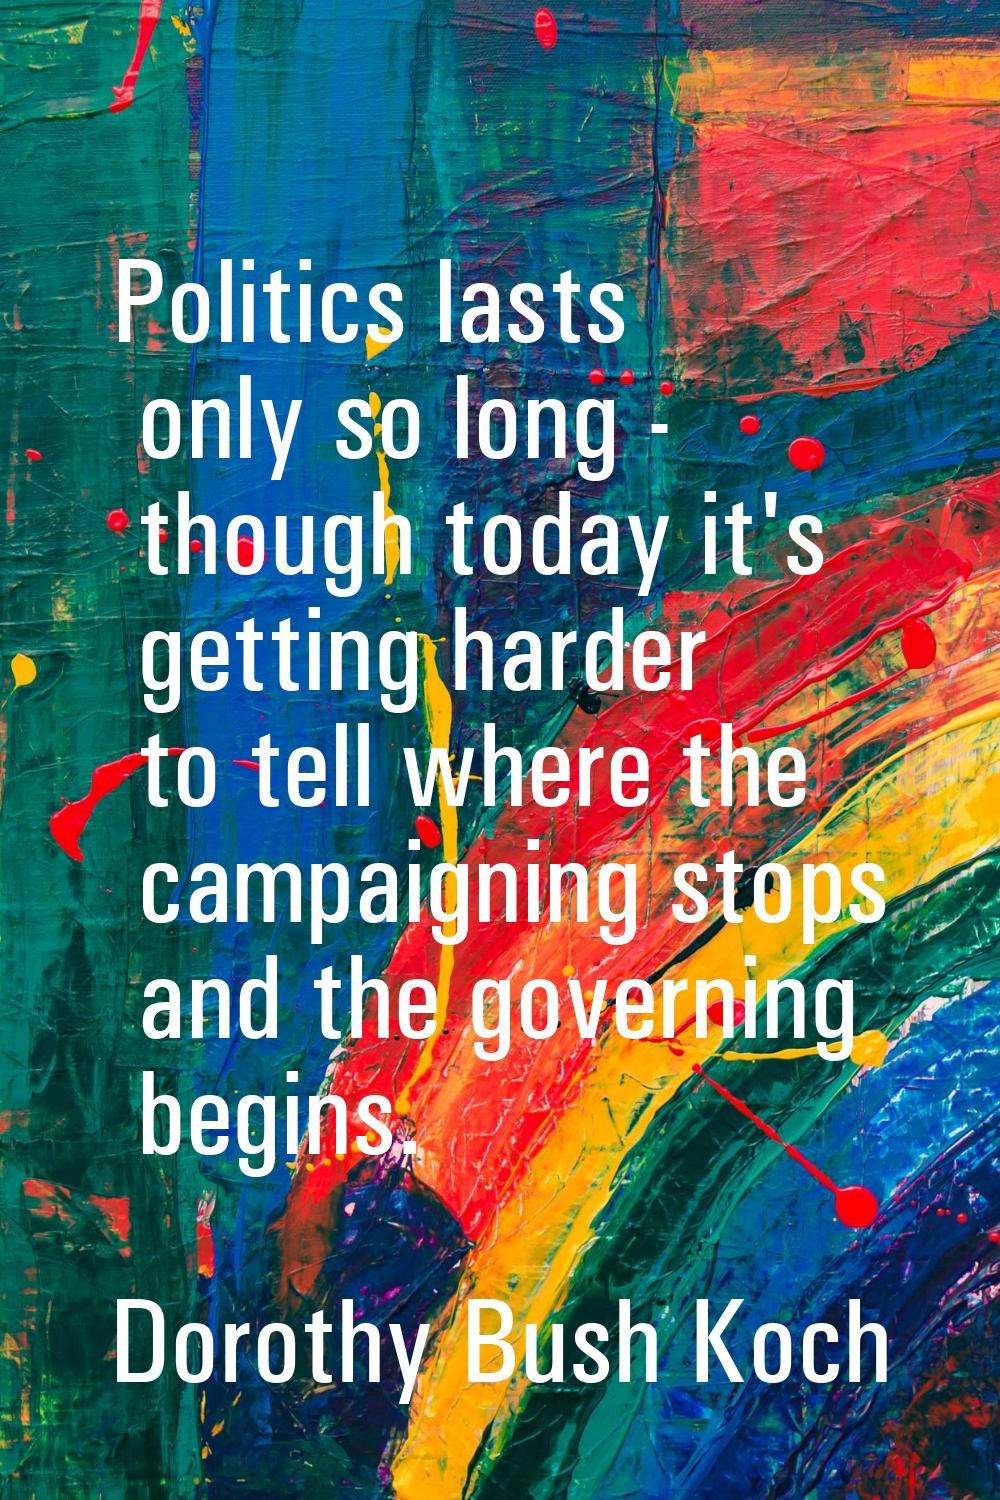 Politics lasts only so long - though today it's getting harder to tell where the campaigning stops 